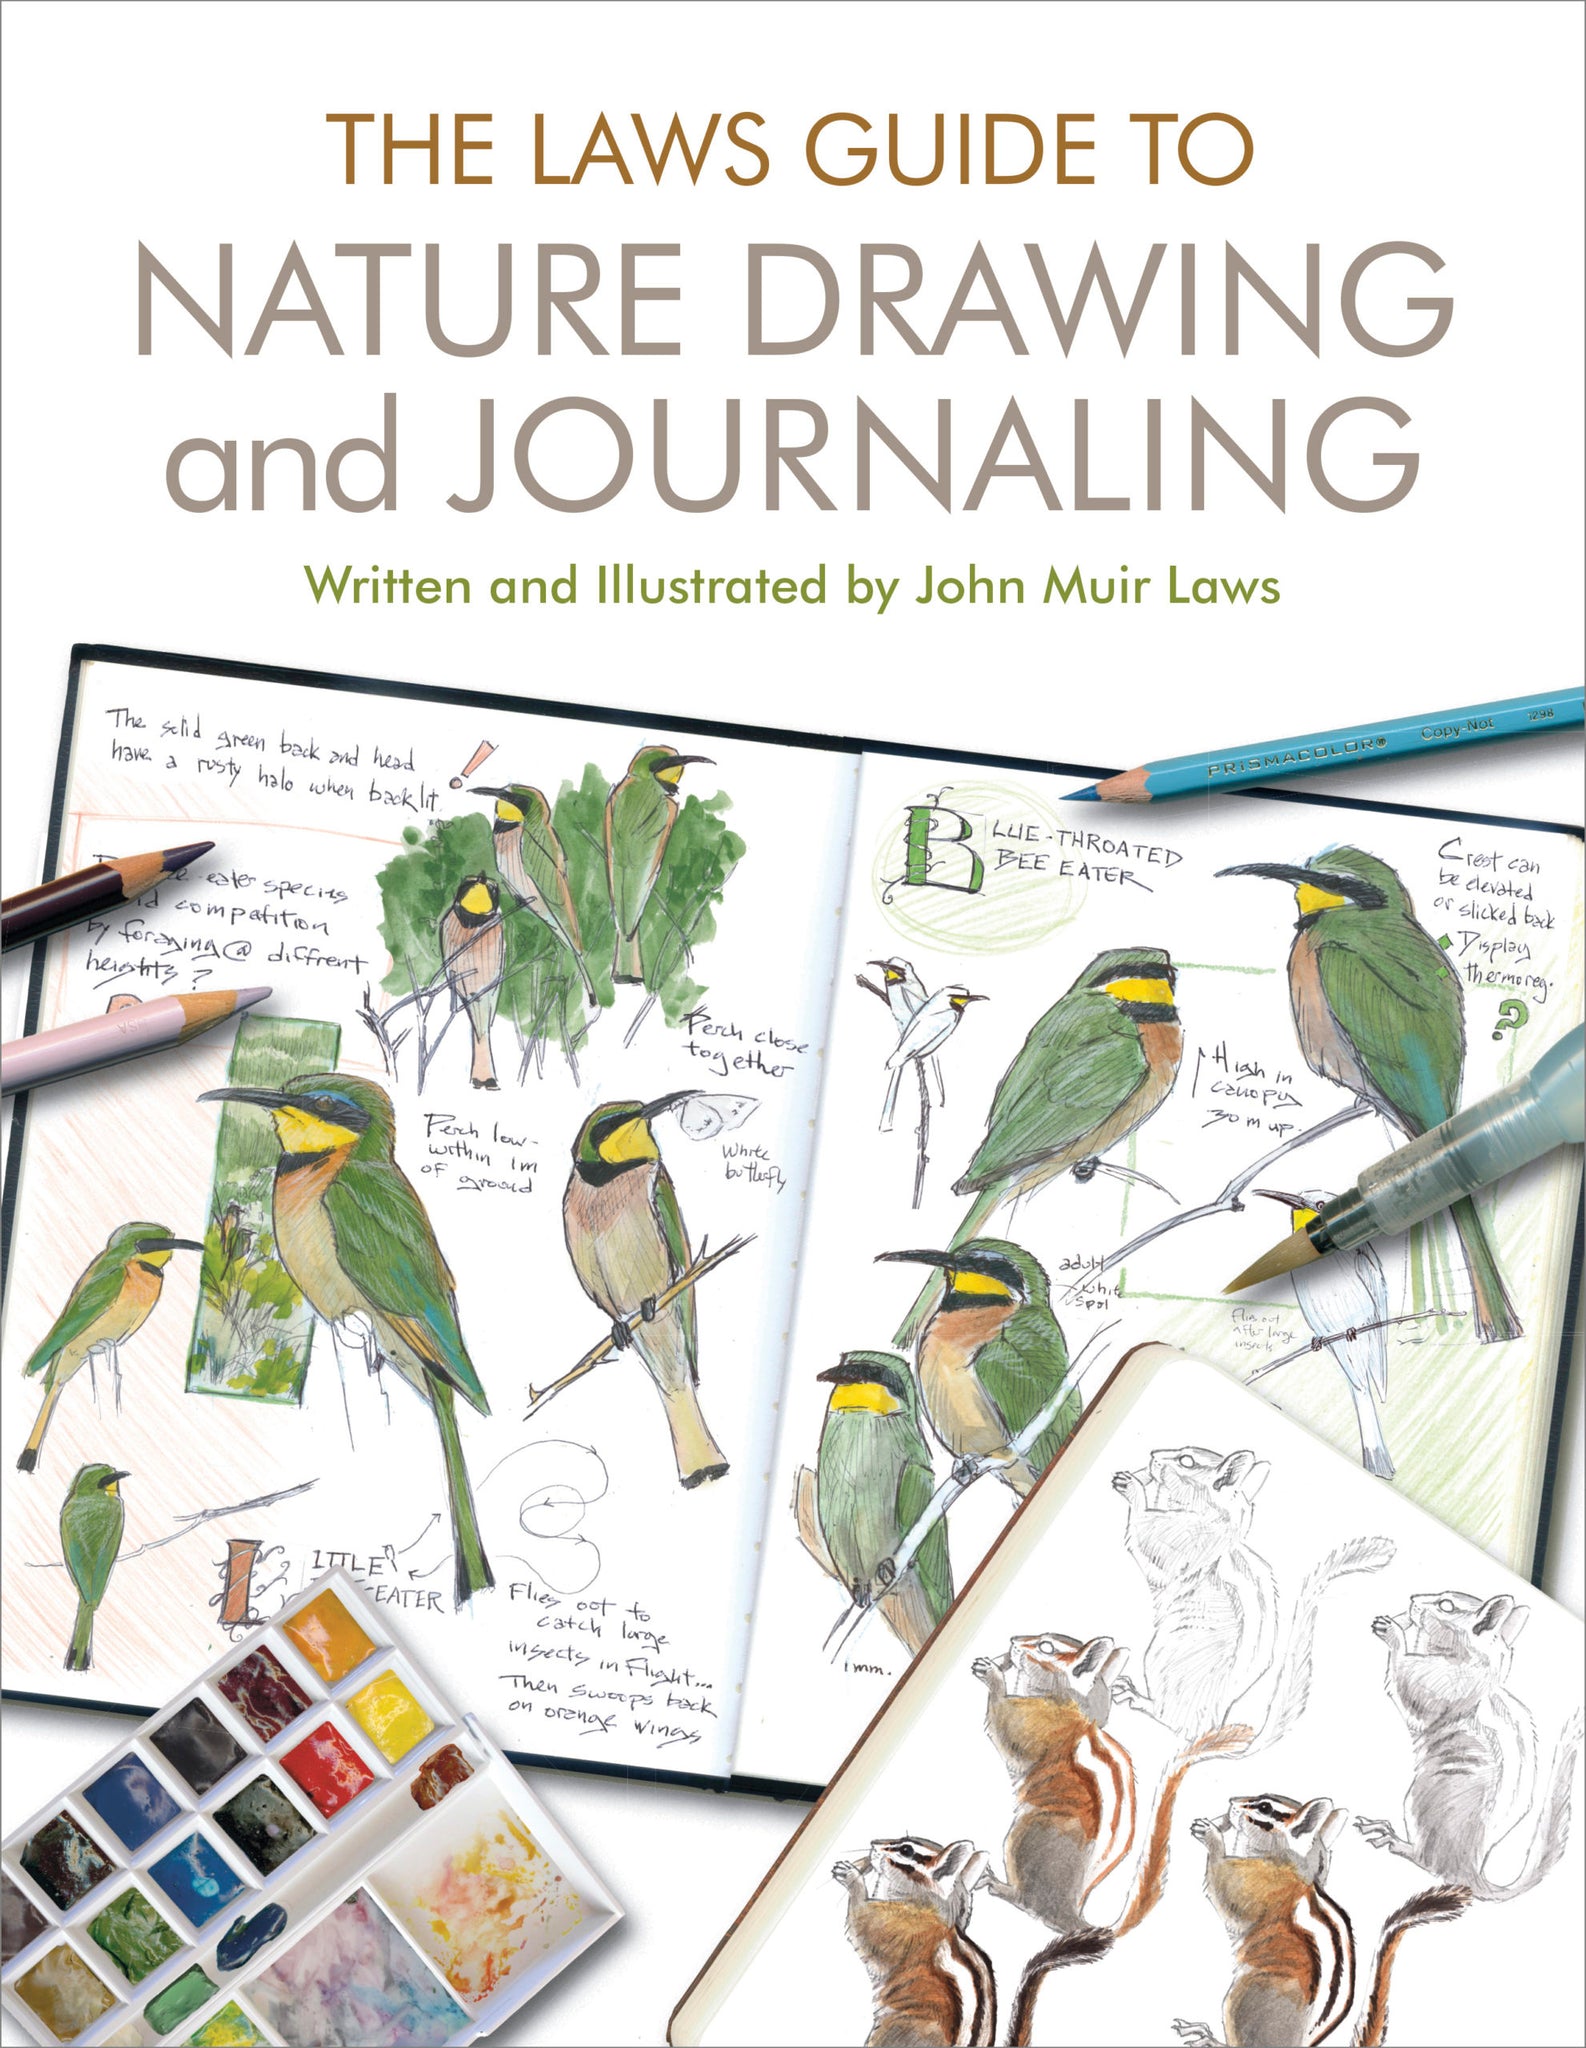 Laws Guide to Nature Drawing